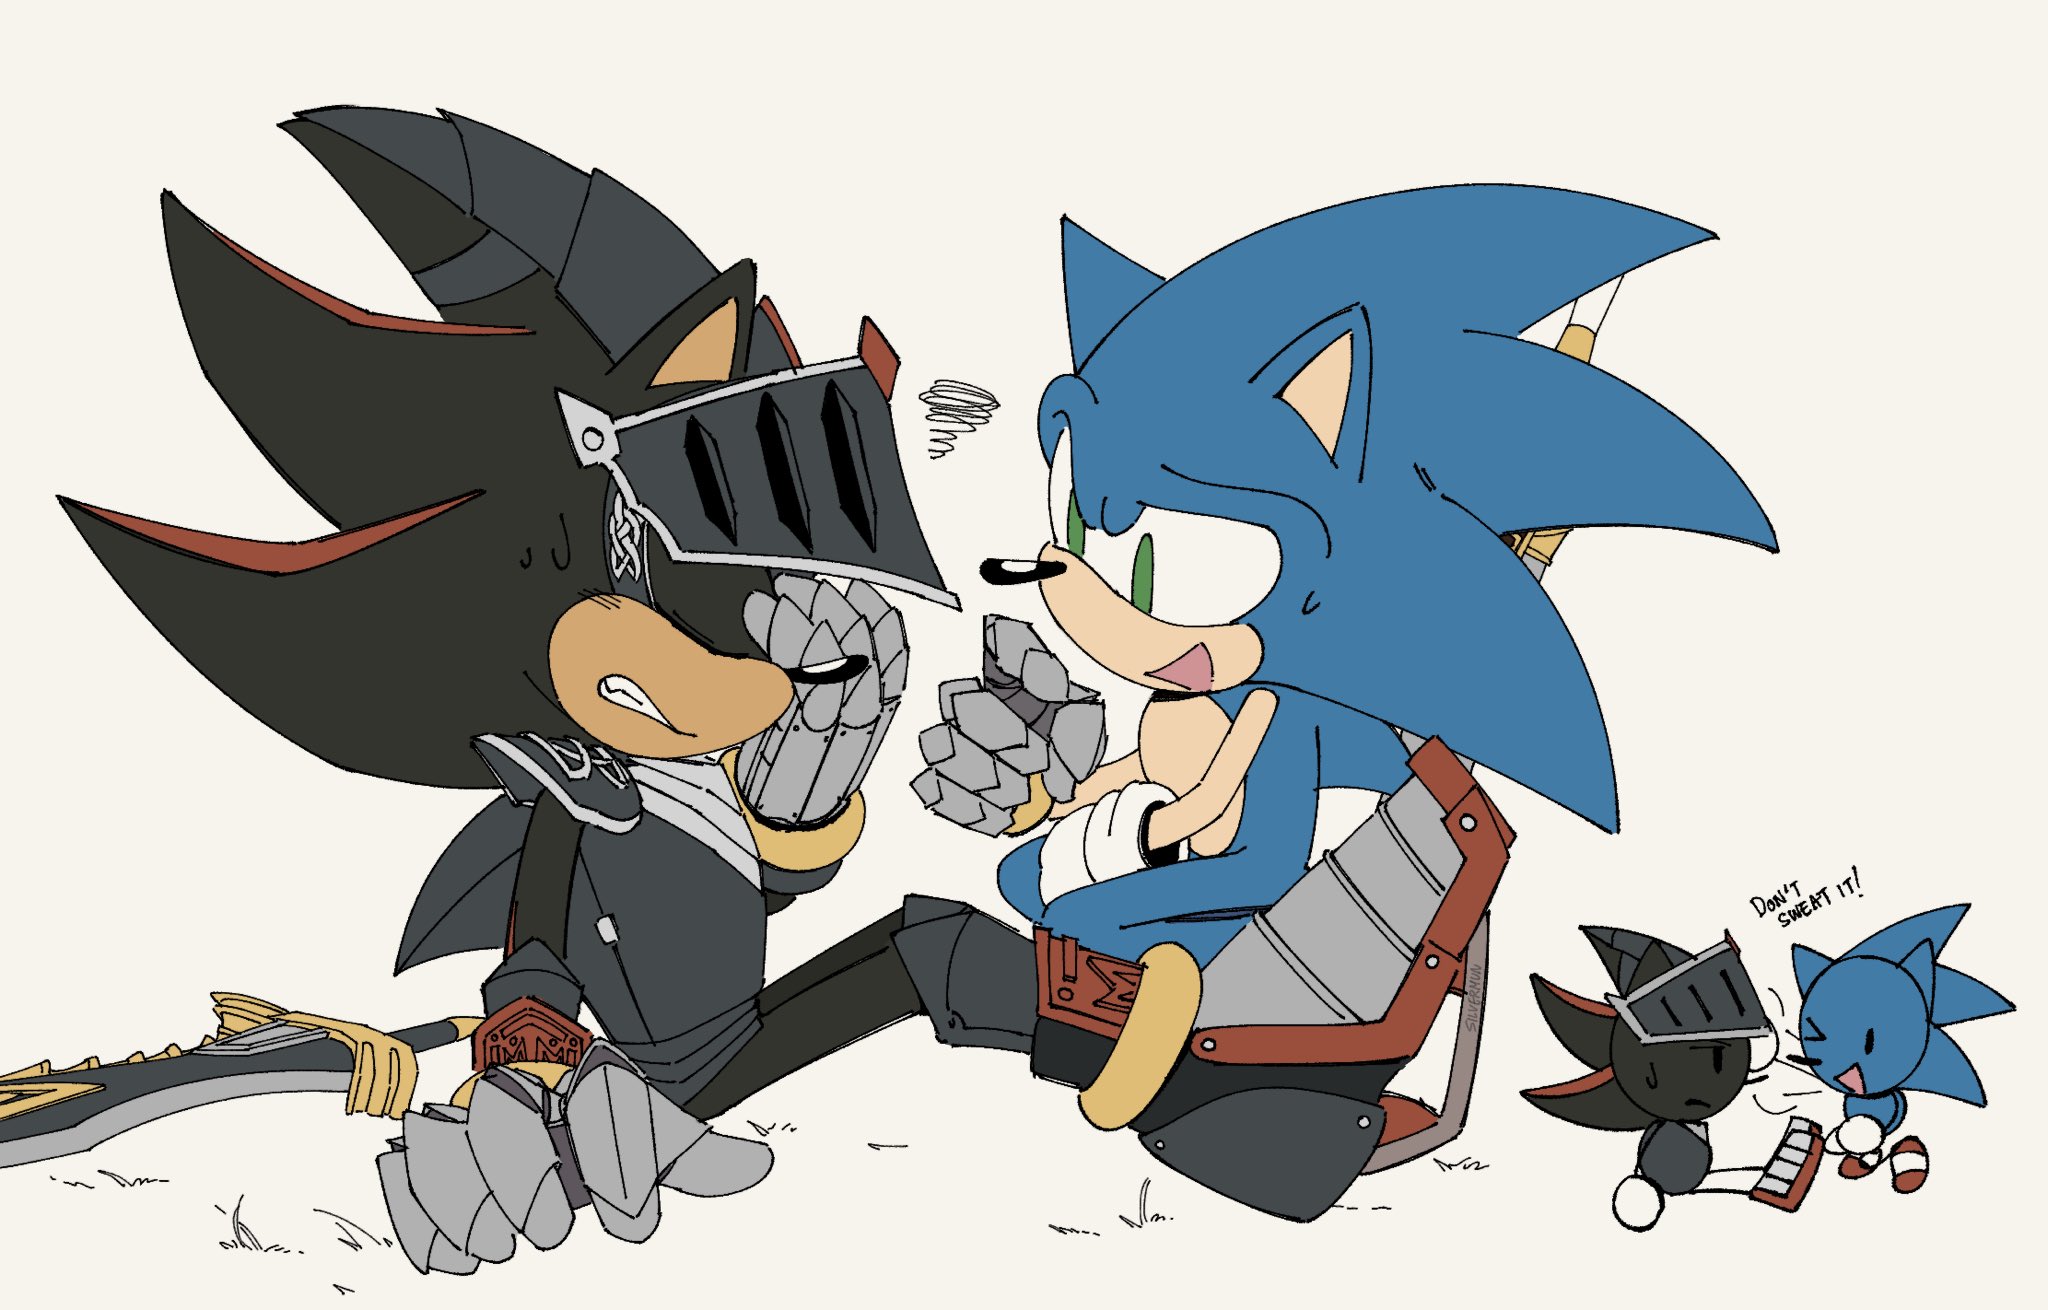 🌺💮ALE💮🌺 on X: #sonictober days 12 Knight, 13 Racing and 14 Reunion.  Sir Lancelot. Sonic, Shadow and Silver racing. Sonic got te 7 chaos  emeralds. #sonic #SonicTheHedgehog #sketches #sonicfanart  #shadowthehedgehog #fanart  /